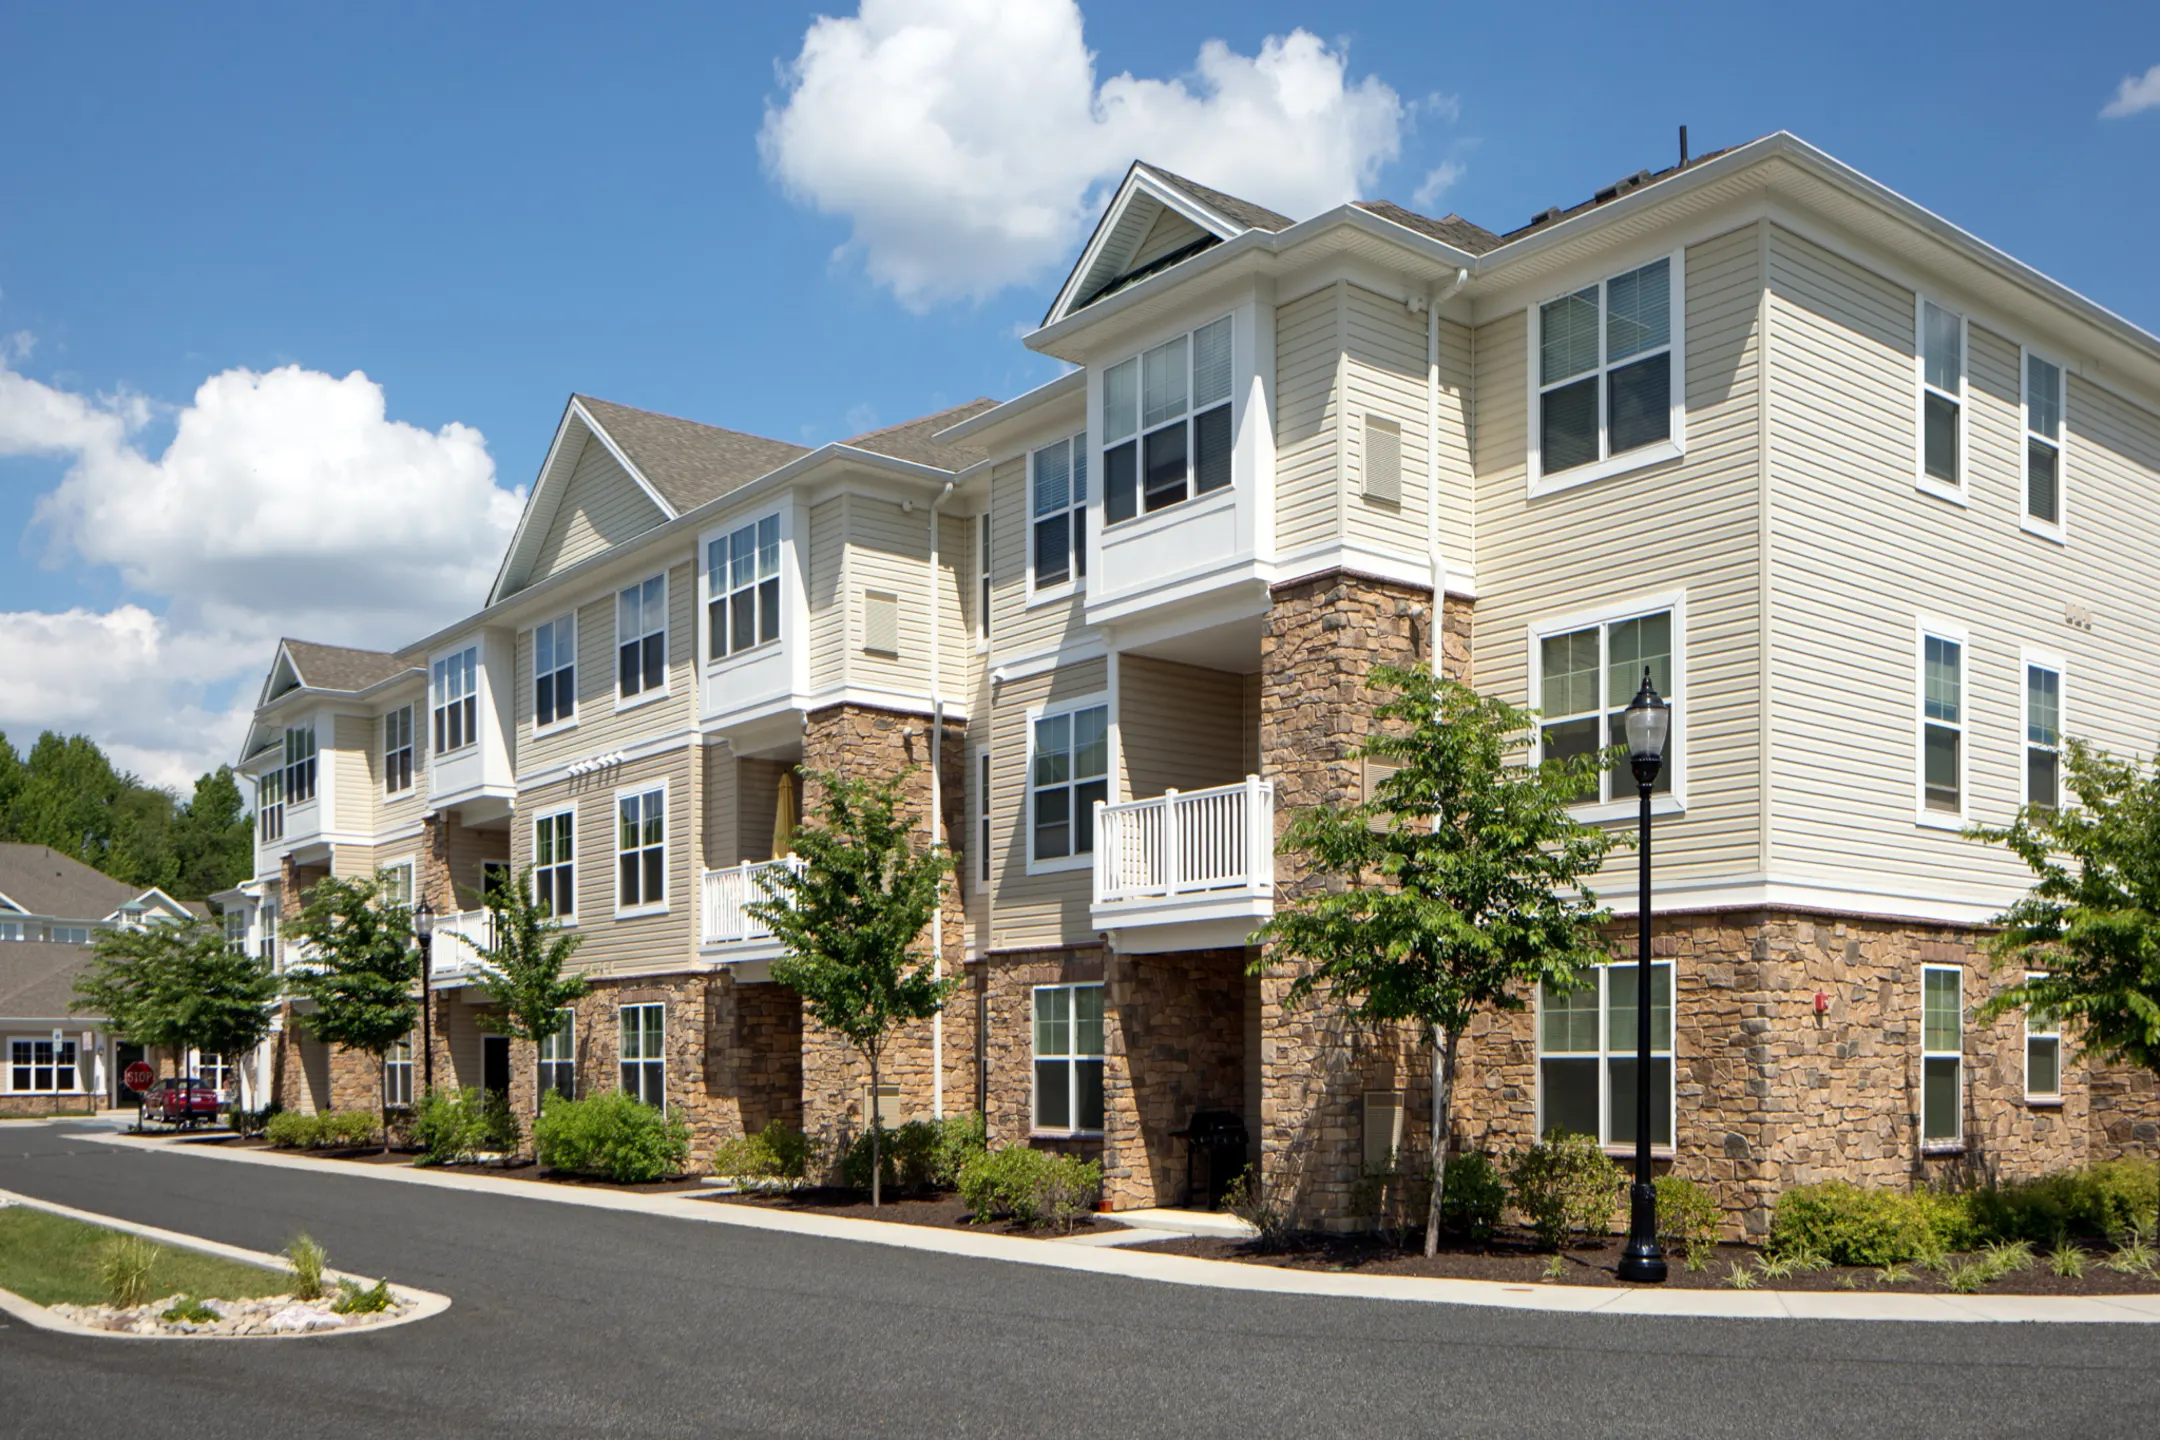 Building - The Riverside Apartments - Aberdeen, MD